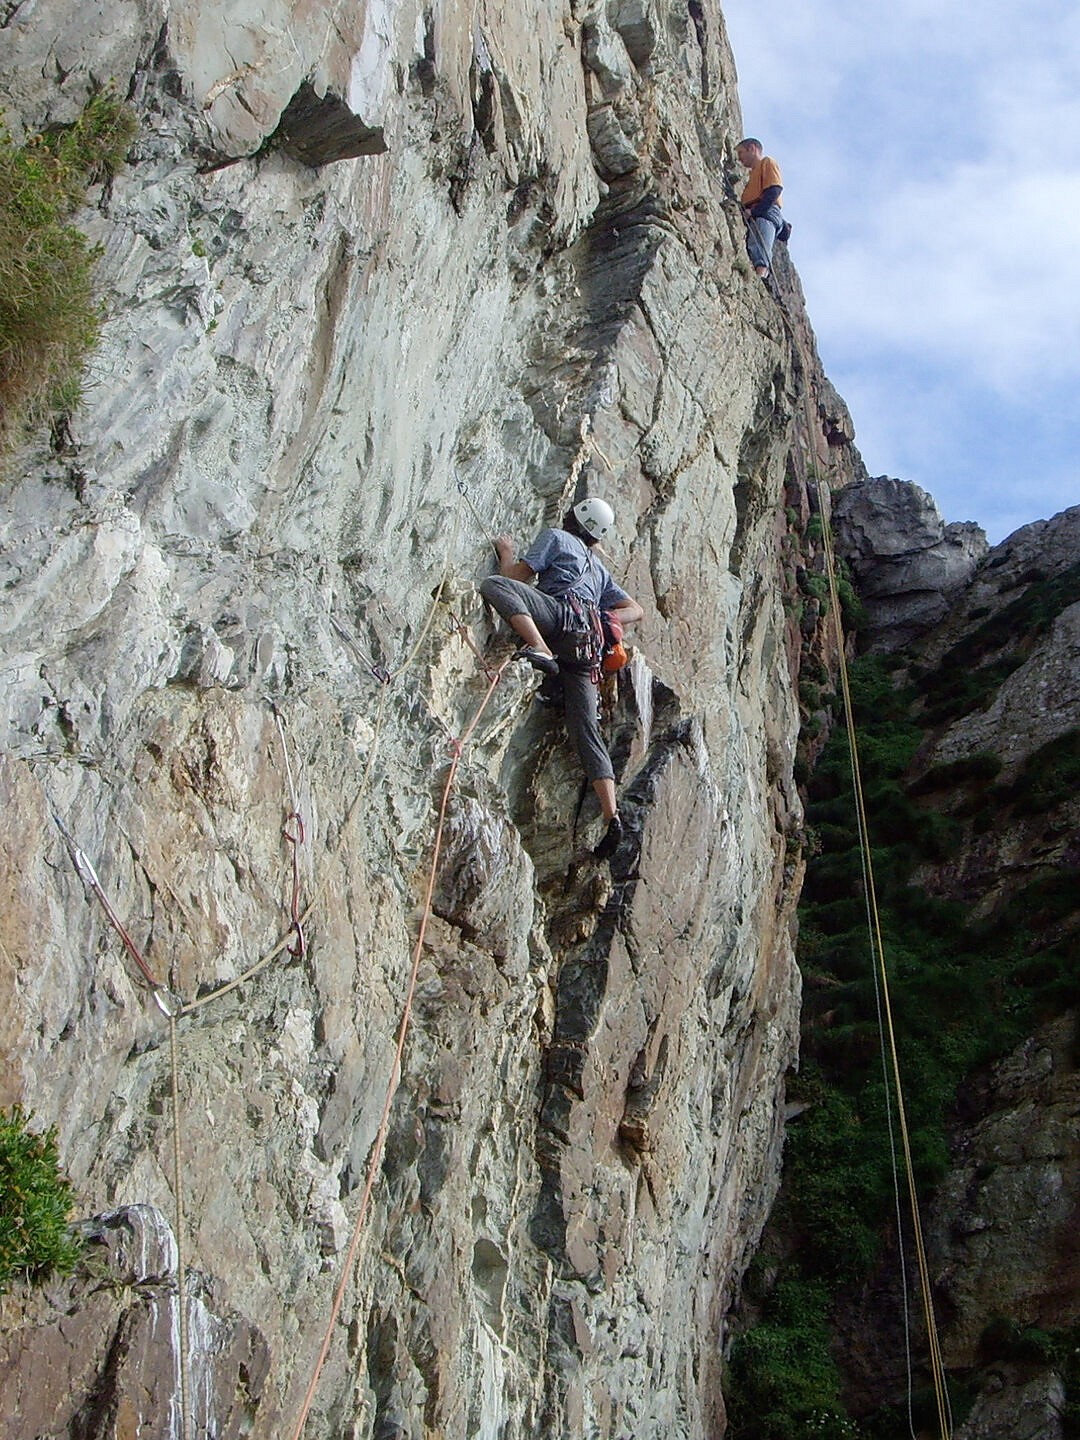 Rob Greenwood leading pitch 1 of Pagan, with Matt Smith belaying Barry Durston on pitch 2  © Sam Underhill